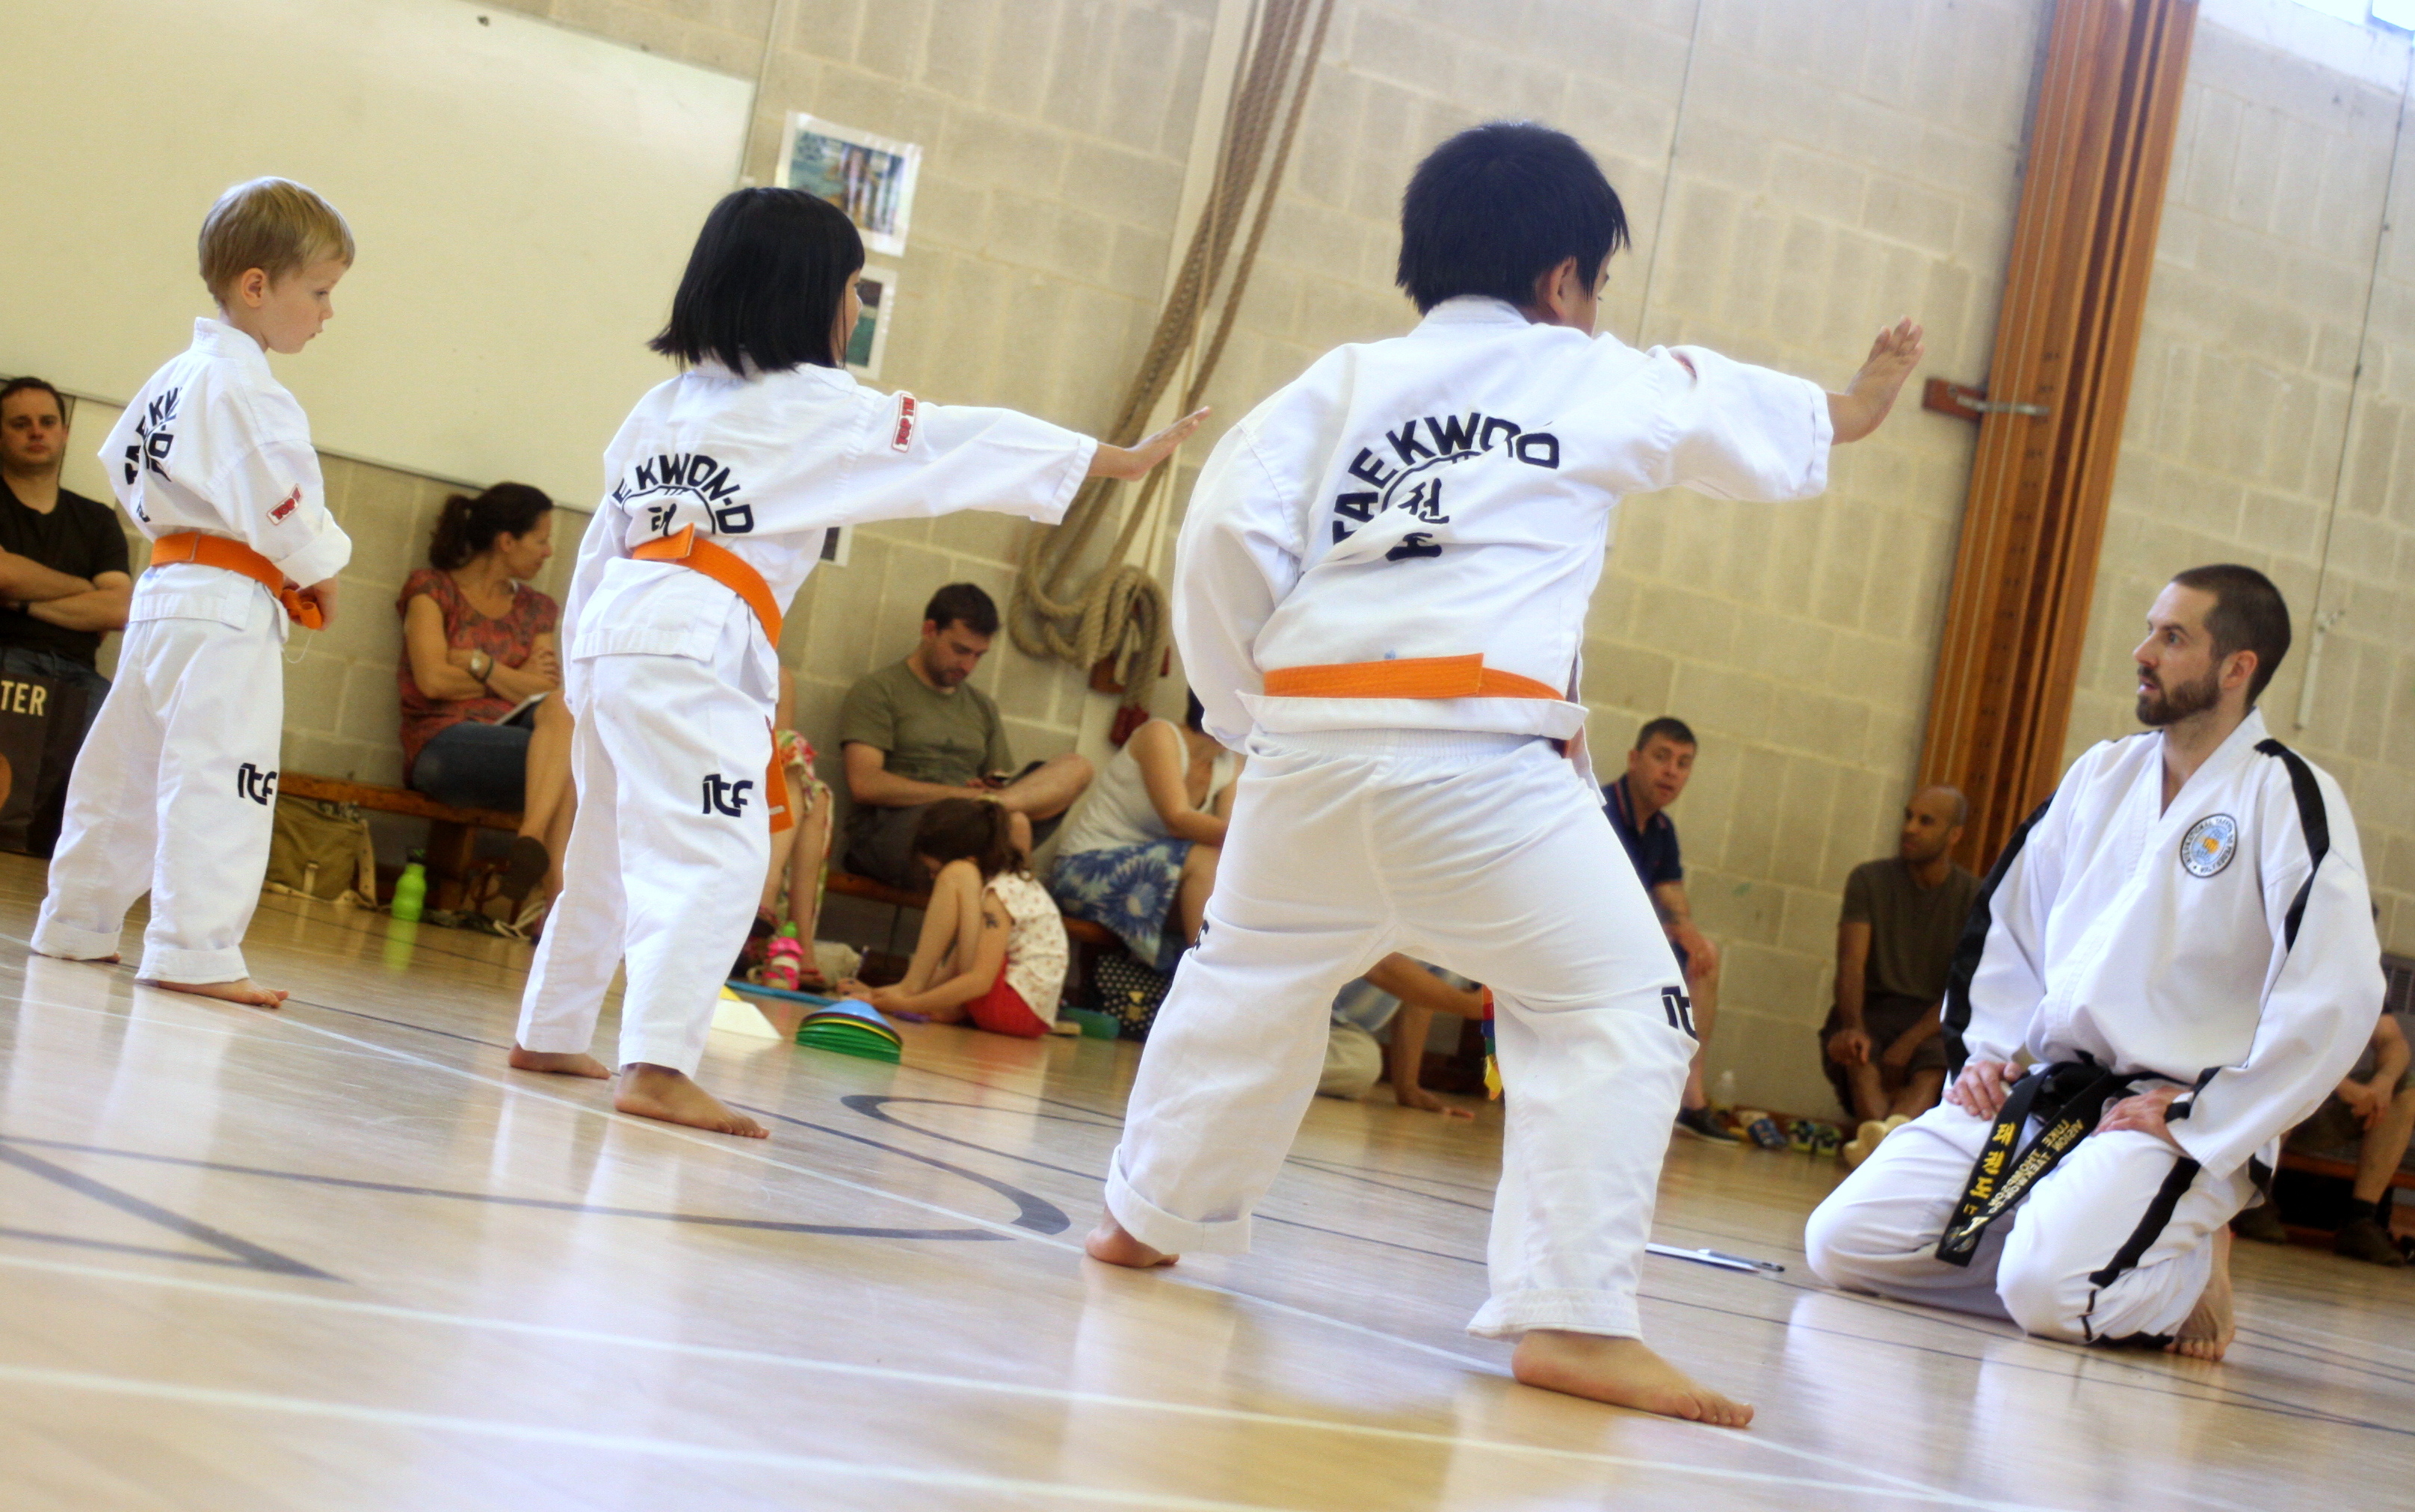 Martial Arts Classes for all ages & abilities in Tunbridge Wells